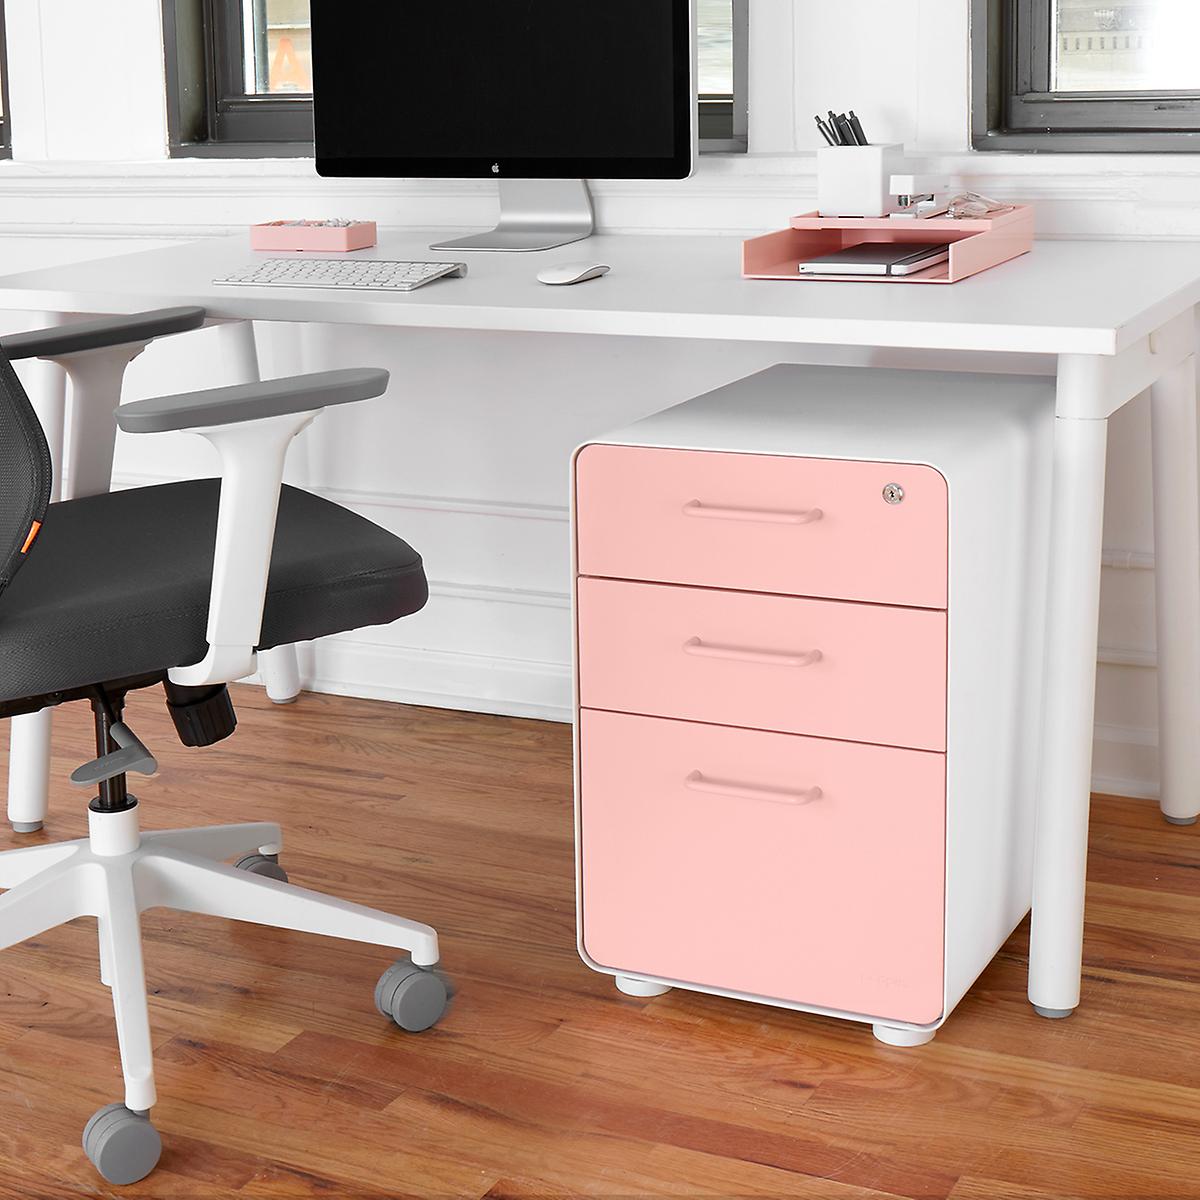 Creative Desk Storage Ideas When You Think All Is Lost – The